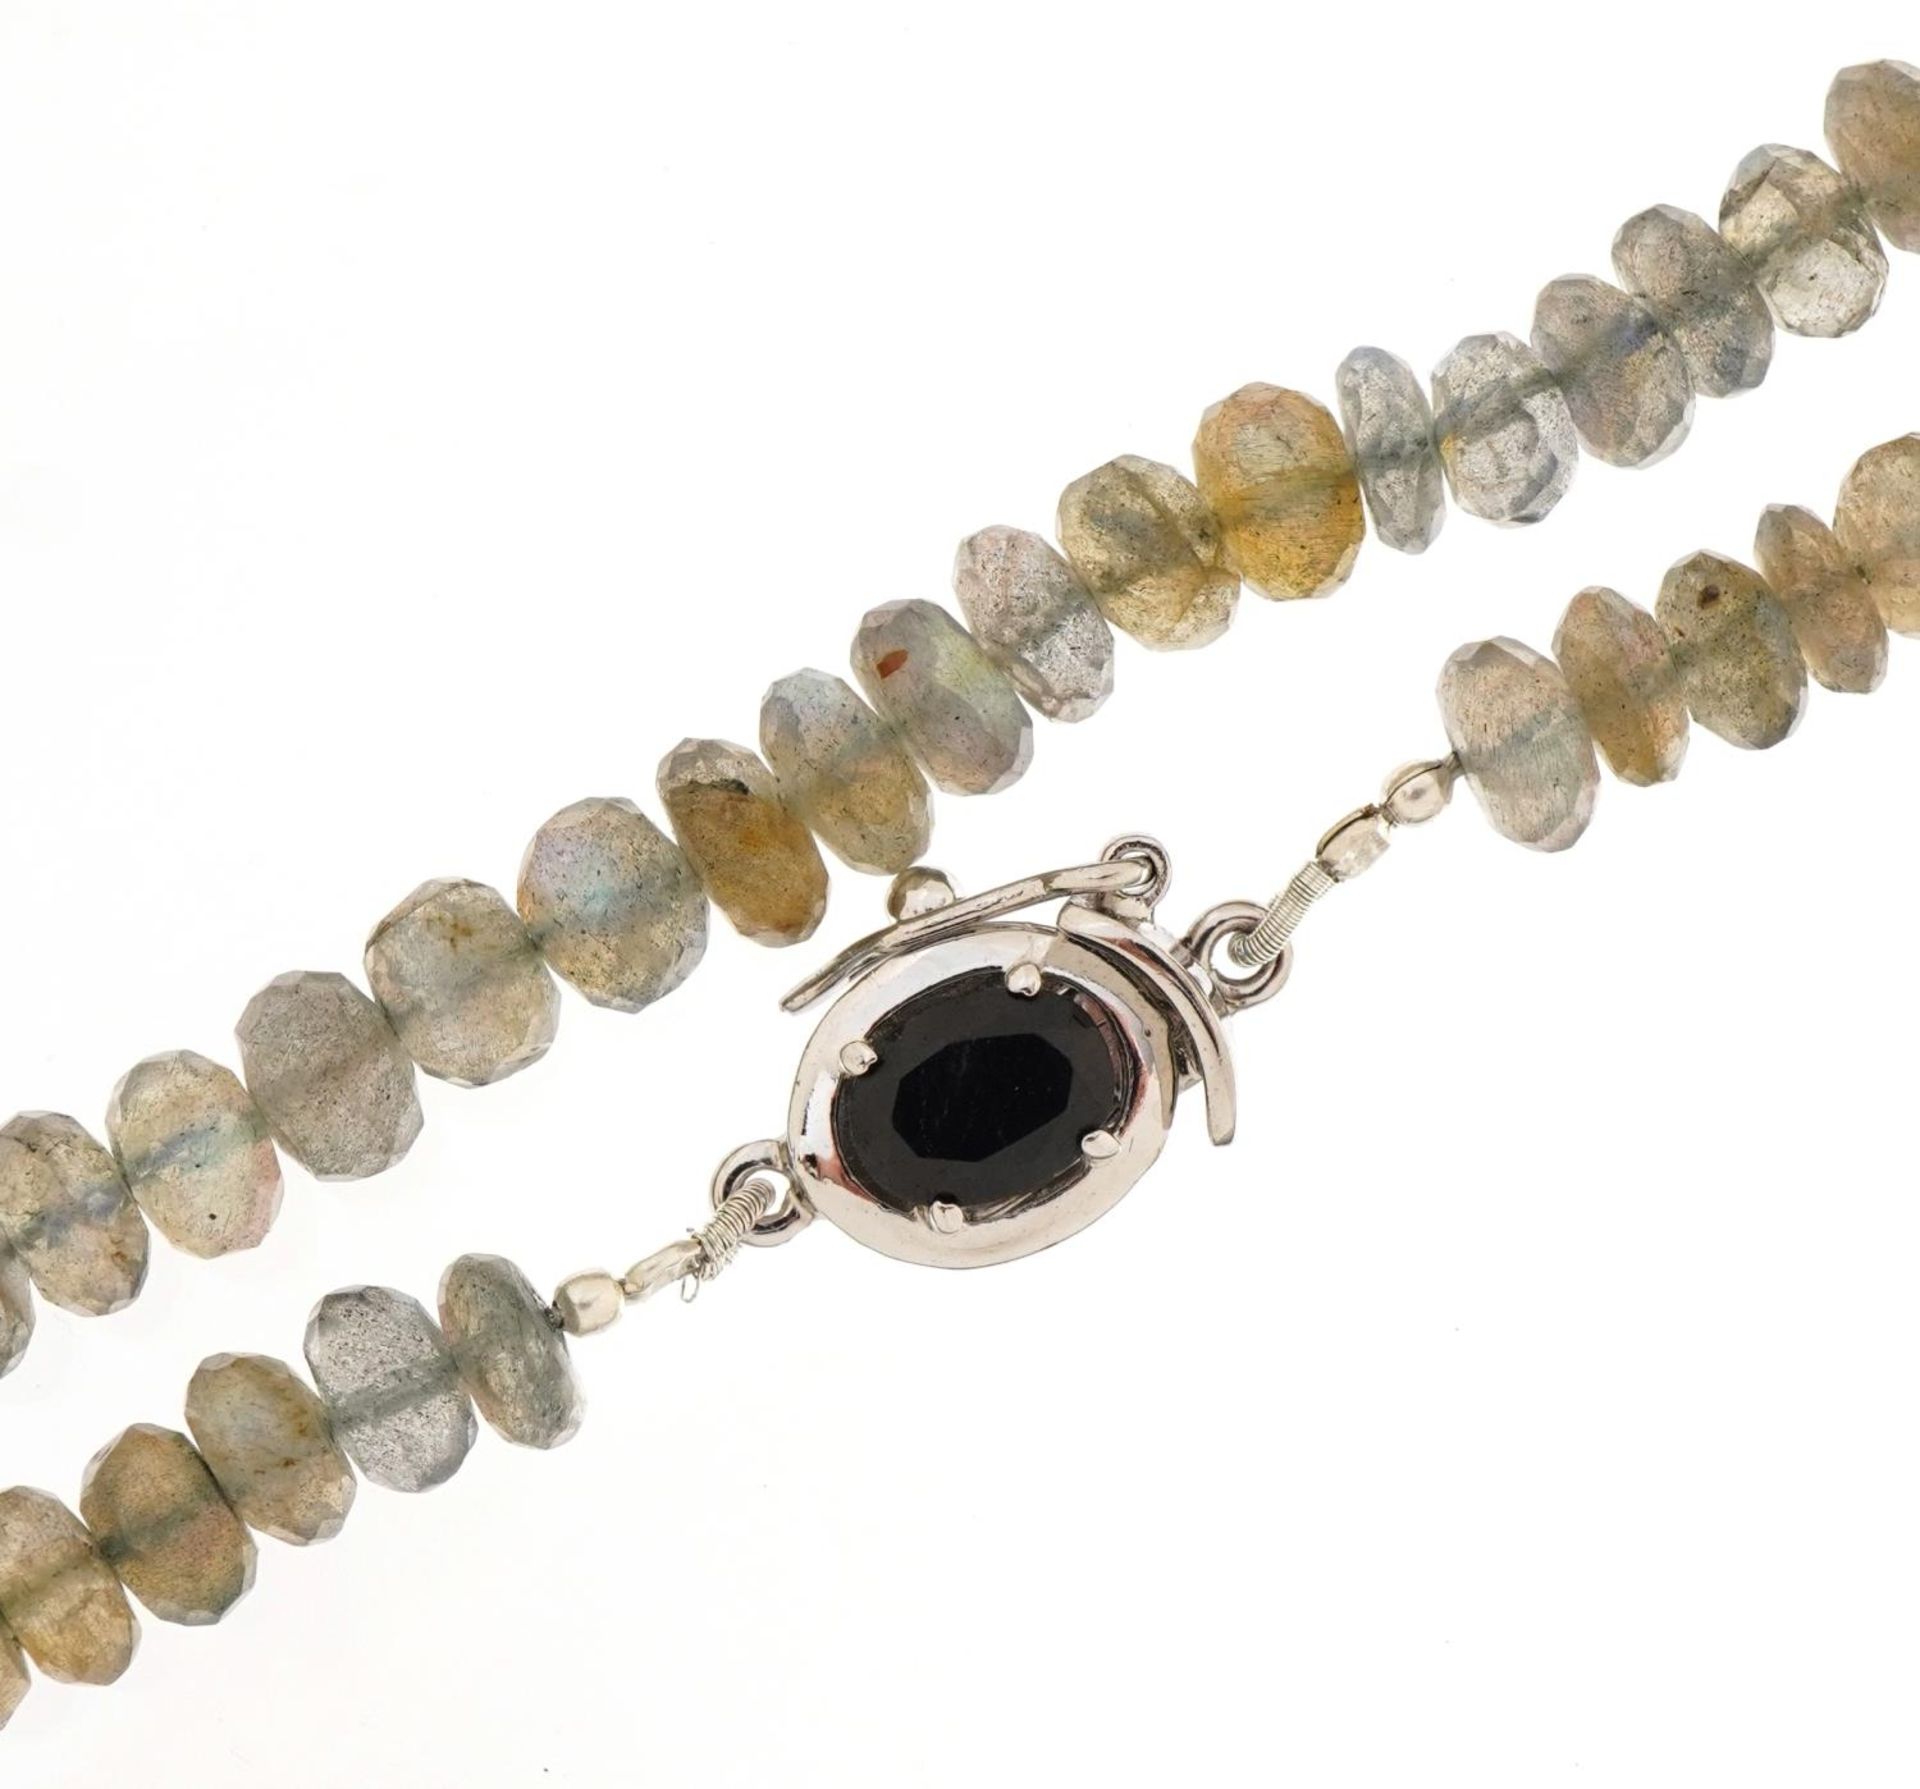 Labradorite single strand bead necklace with silver gem set clasp, 46cm in length, 31.9g